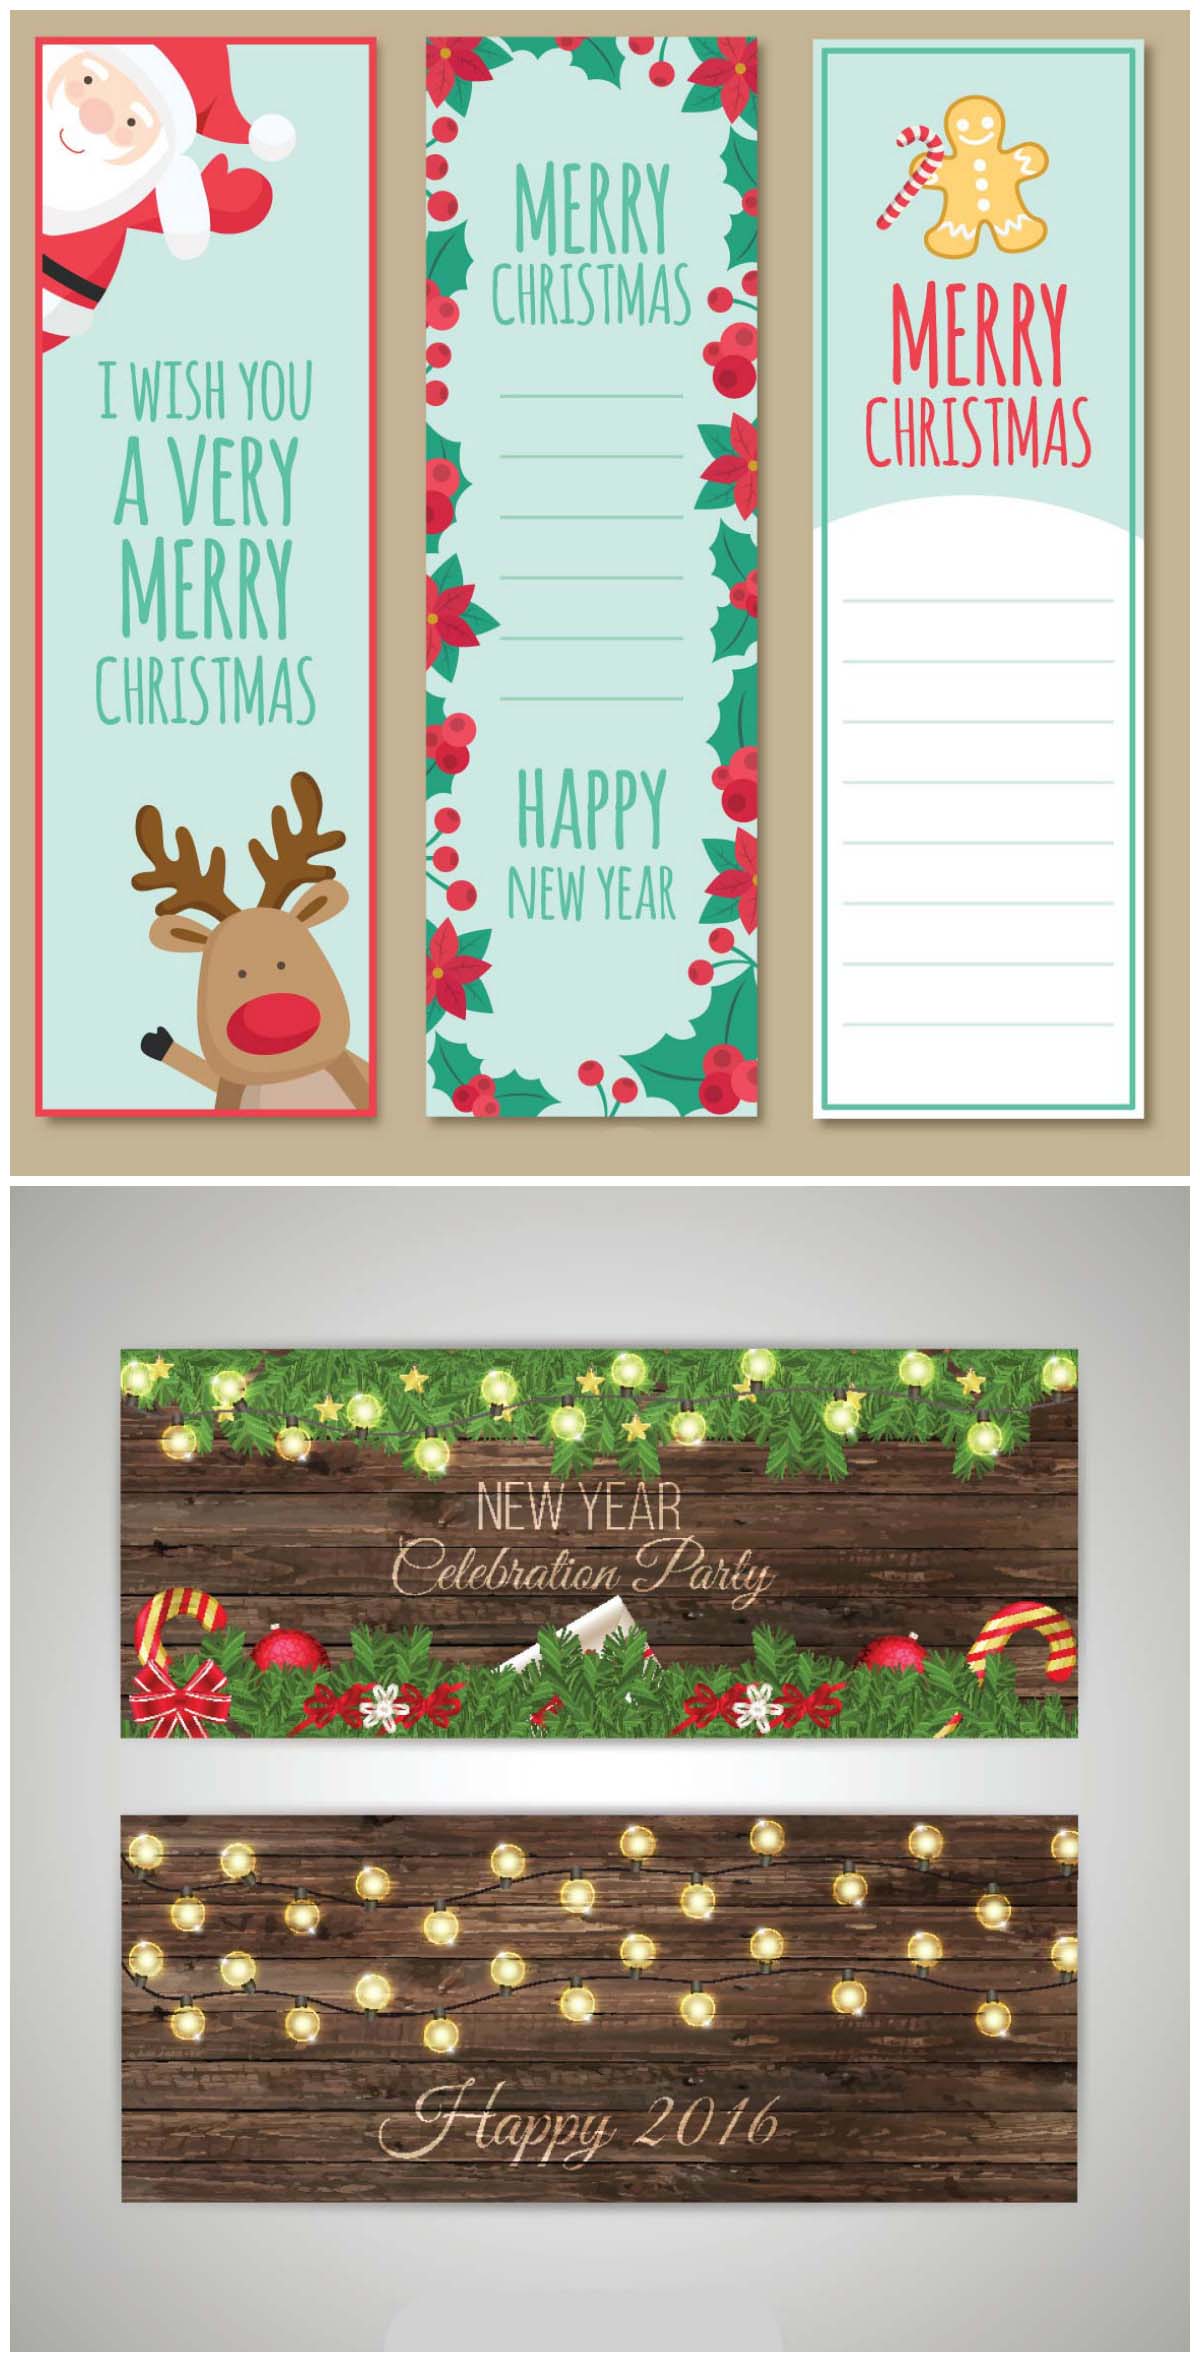 Christmas wooden party banners